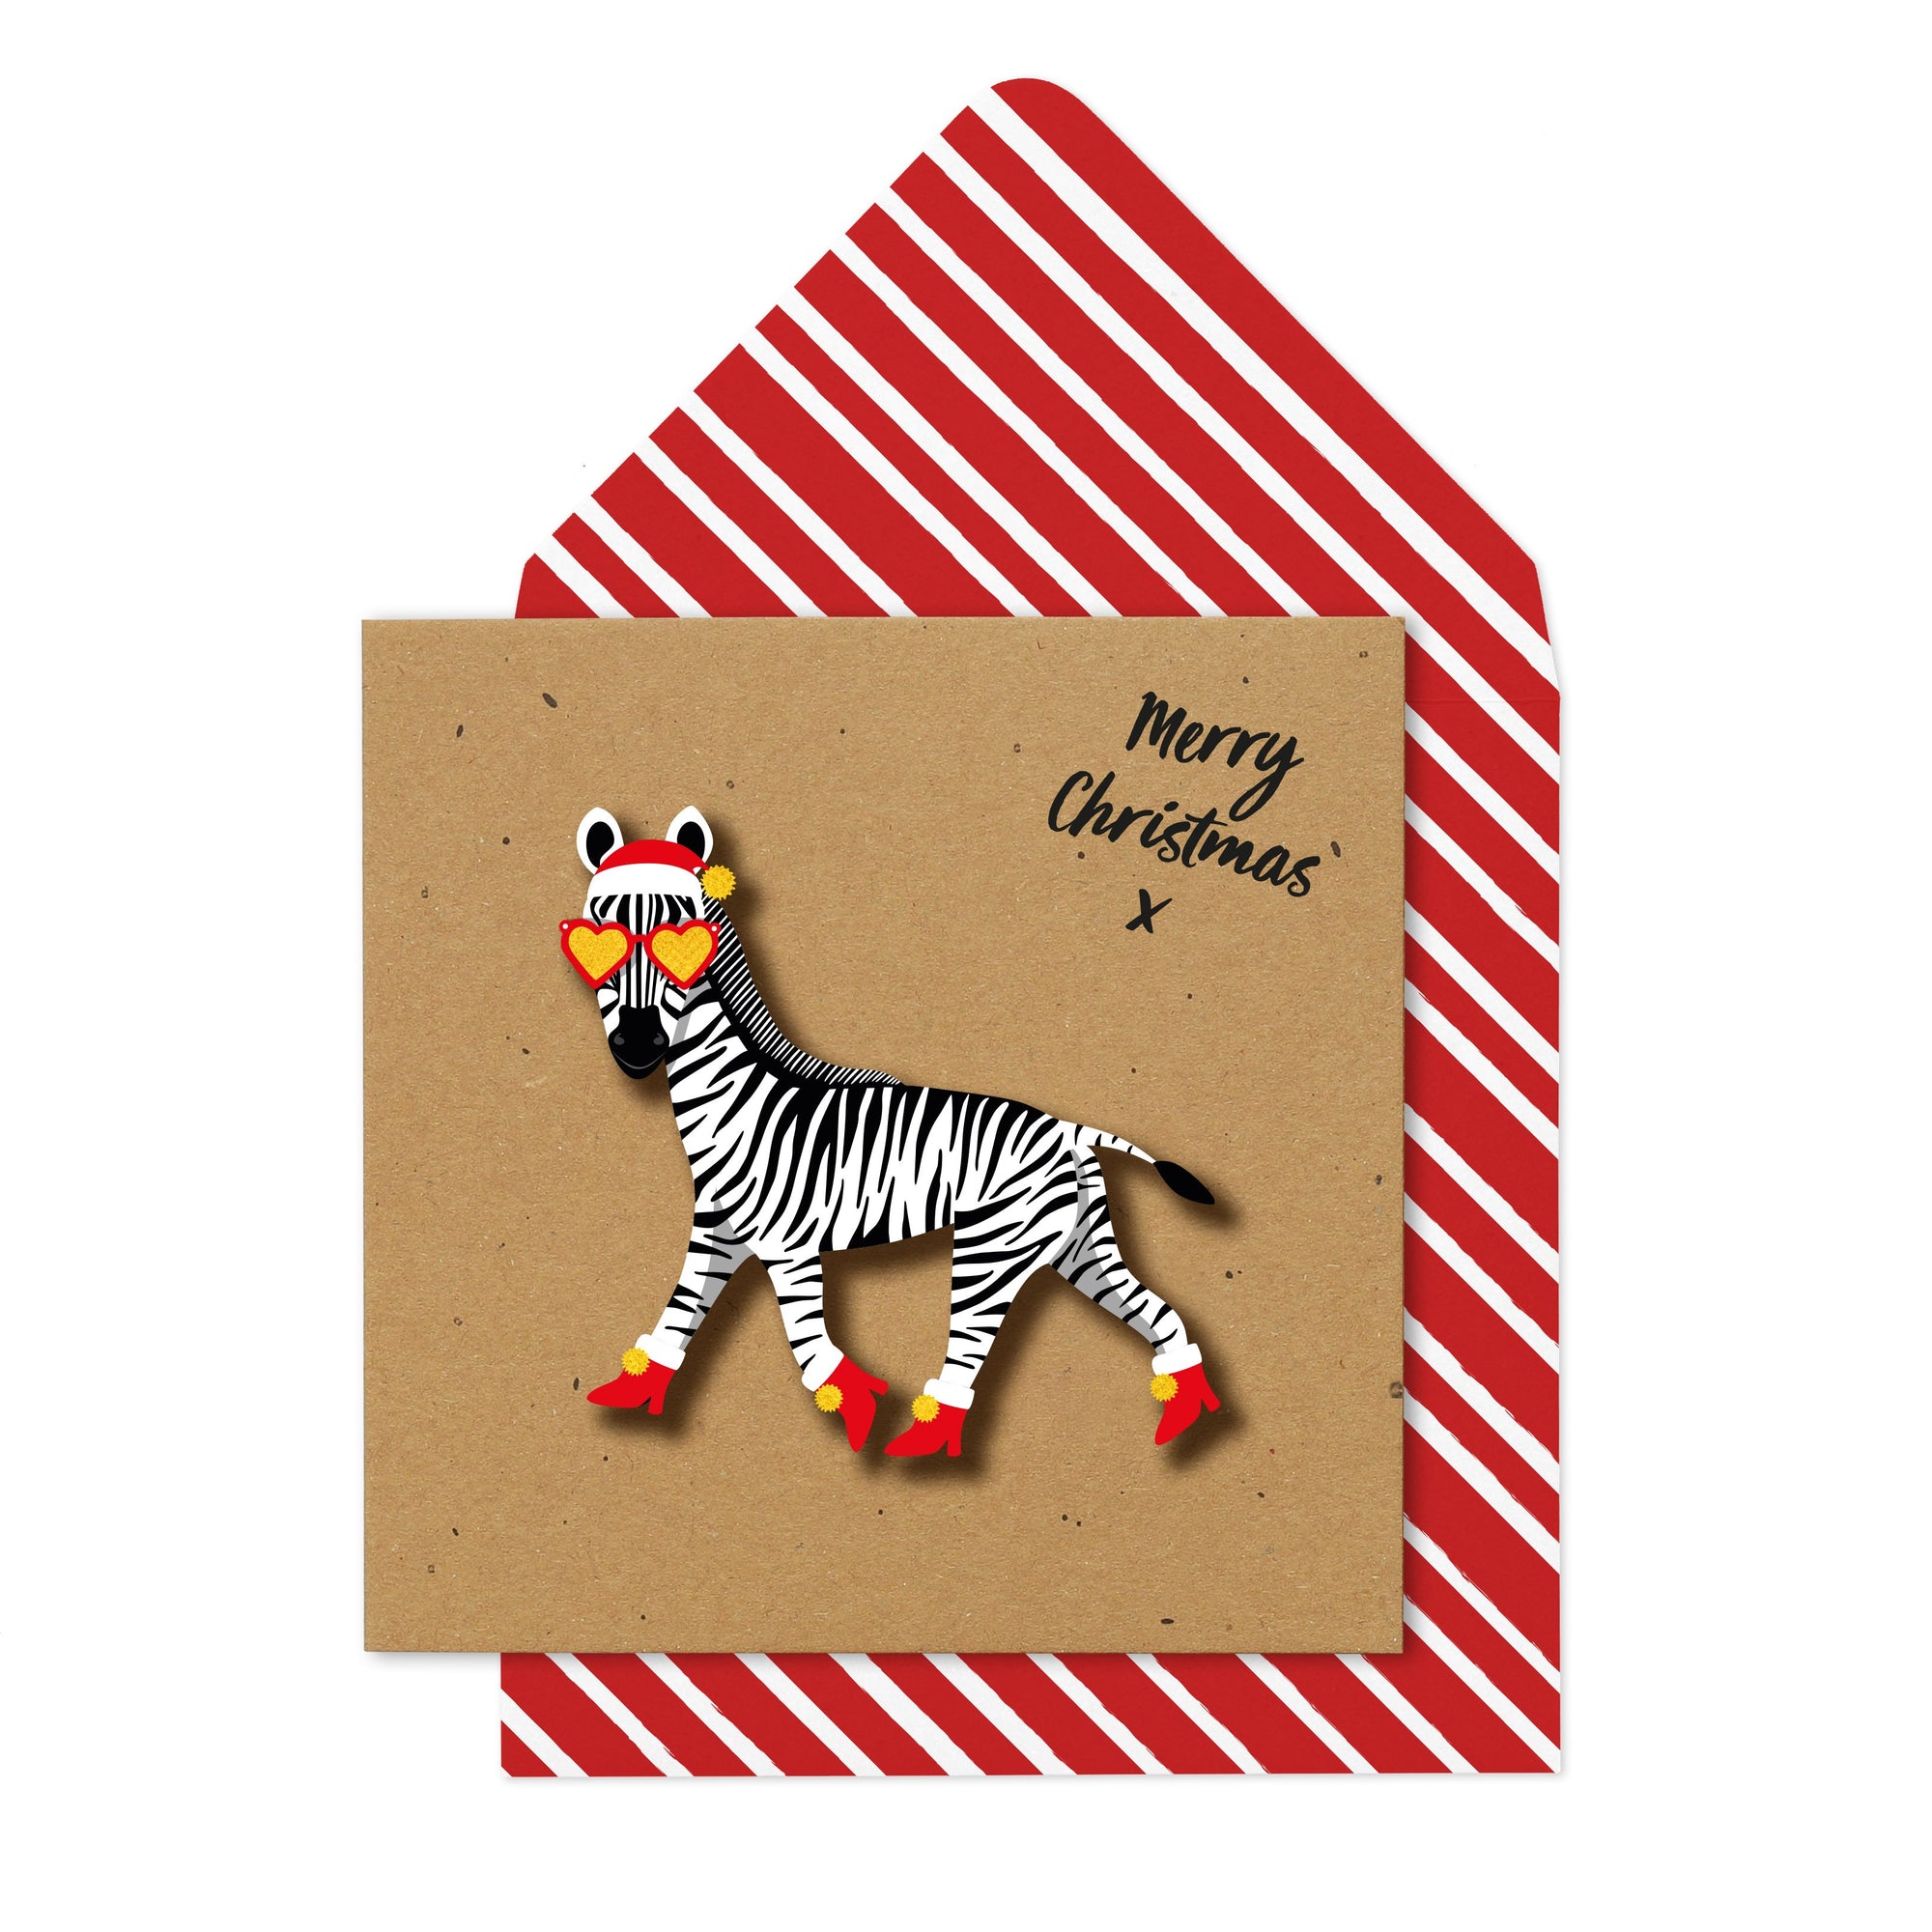 Merry Christmas' Zebra in Boots and Sunnies - TACHE Trade